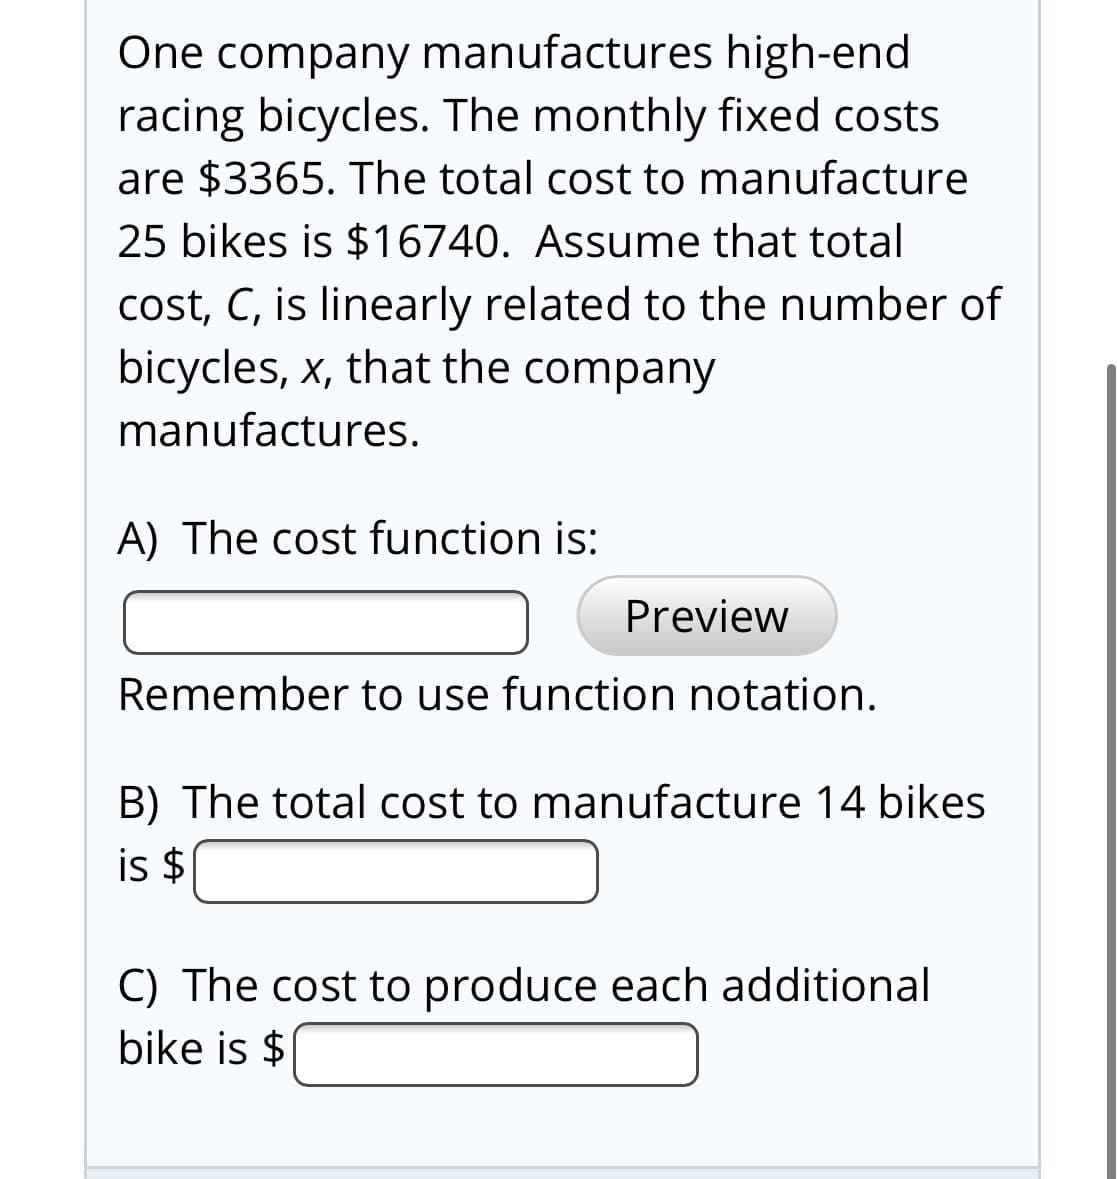 One company manufactures high-end
racing bicycles. The monthly fixed costs
are $3365. The total cost to manufacture
25 bikes is $16740. Assume that total
cost, C, is linearly related to the number of
bicycles, x, that the company
manufactures.
A) The cost function is:
Preview
Remember to use function notation.
B) The total cost to manufacture 14 bikes
is $
C) The cost to produce each additional
bike is $
